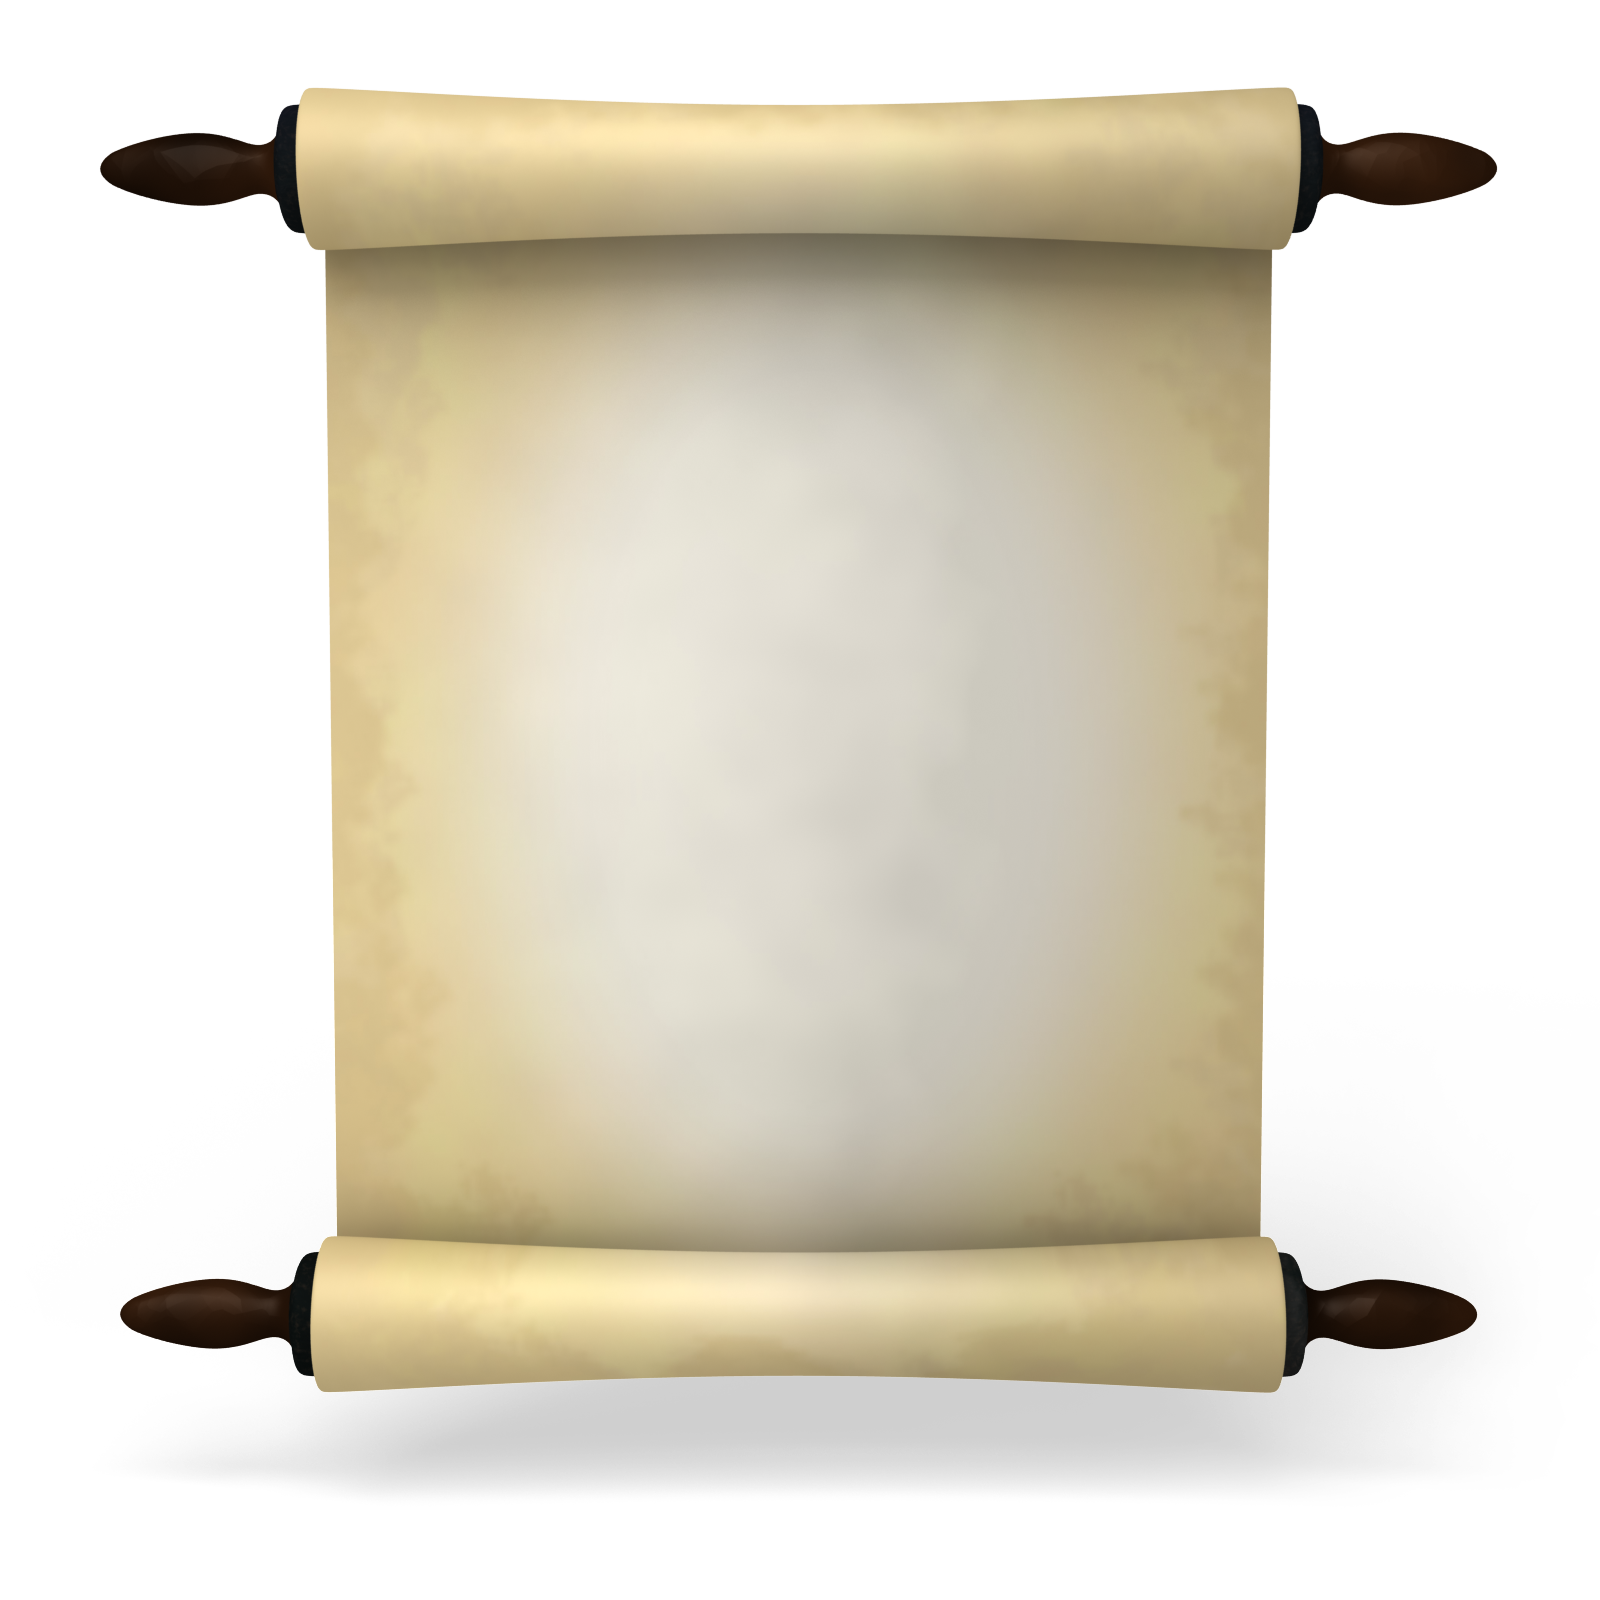 Scroll Free Download Png Png Image - Scroll, Transparent background PNG HD thumbnail